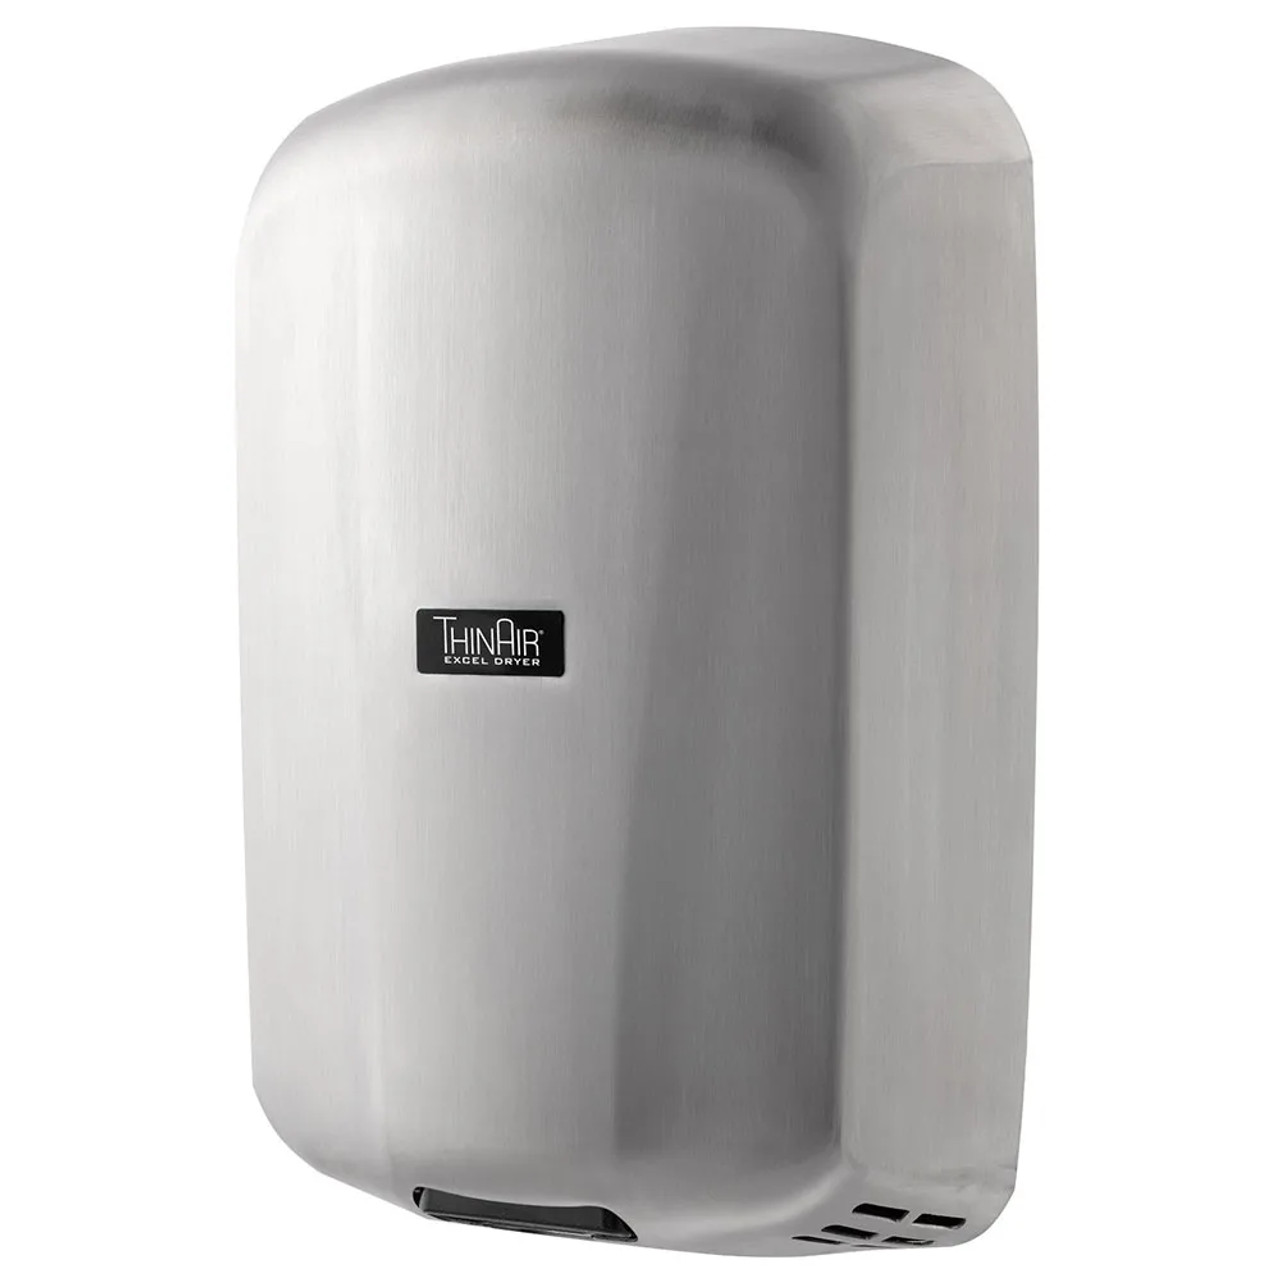 Excel Dryer Automatic Hand Dryer - 14 Second Dry Time, Stainless Steel, 110-120V - Chicken Pieces